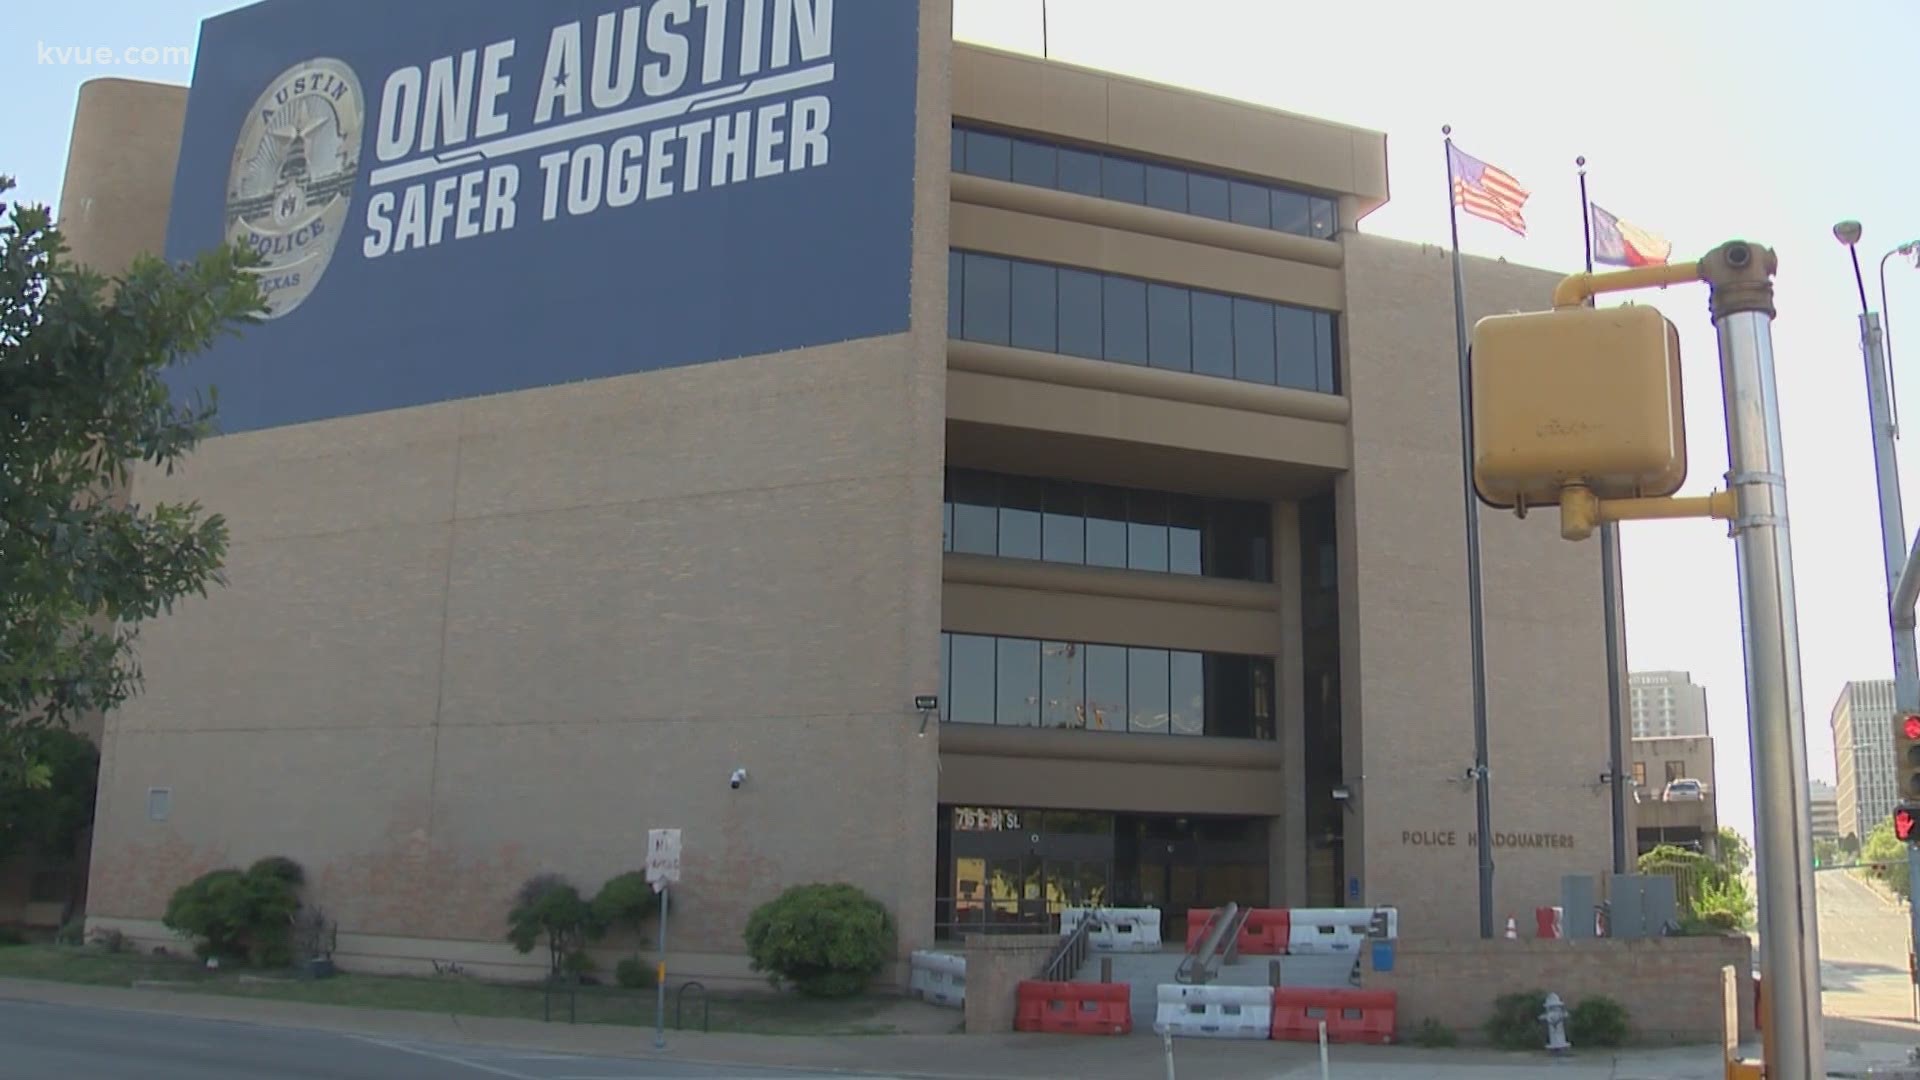 The Austin Police Association says 911 response times are rising, thanks in part to the City's new budget.